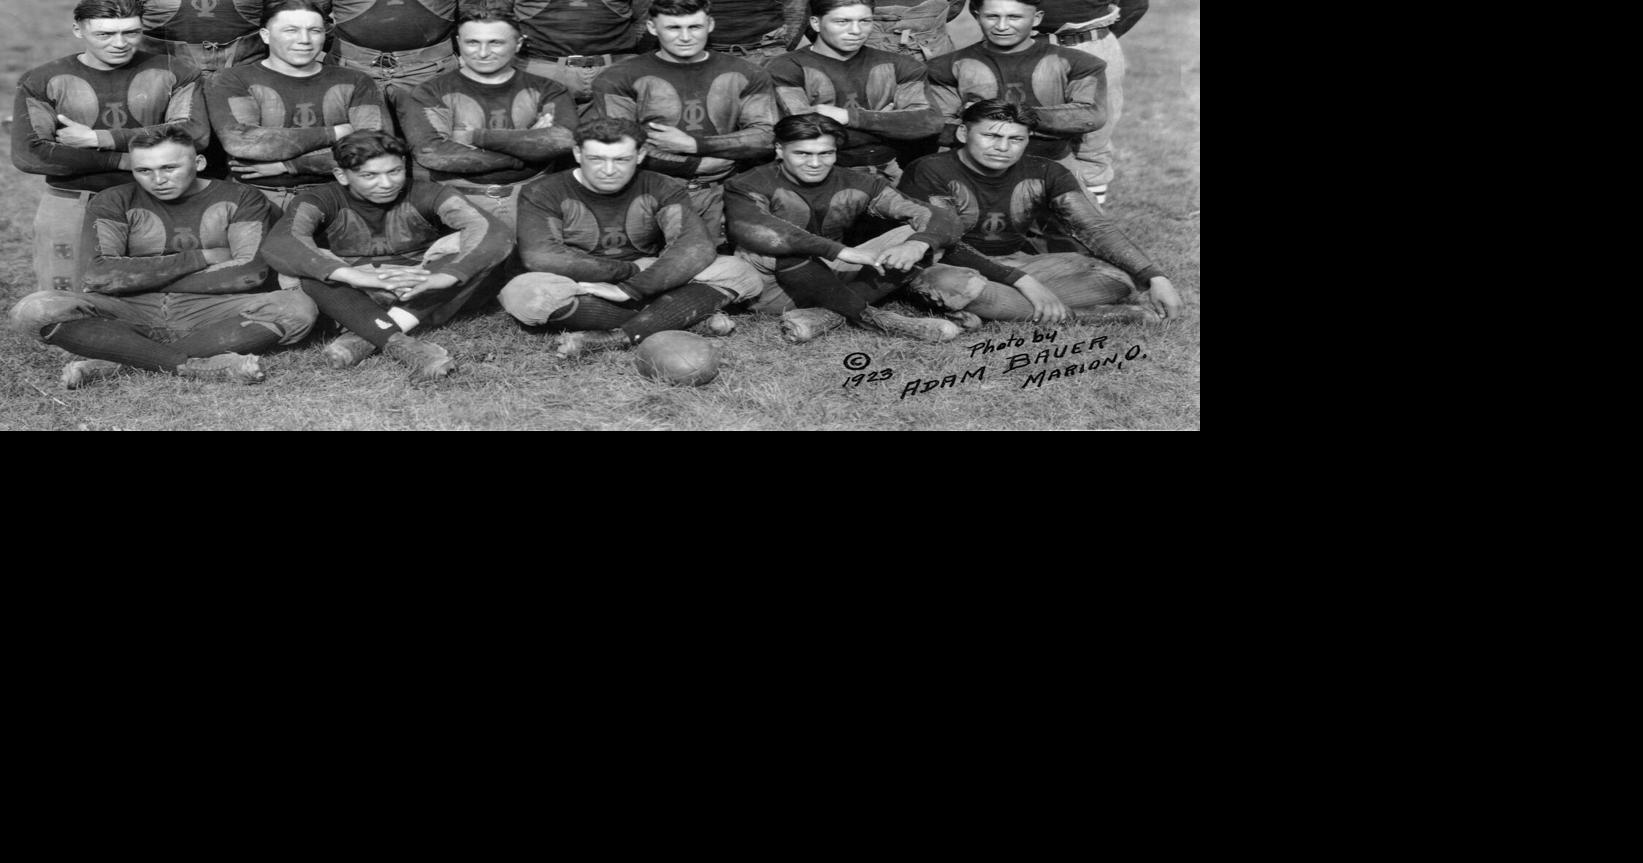 Oorang Indians, all-Native American NFL team, played 100 years ago